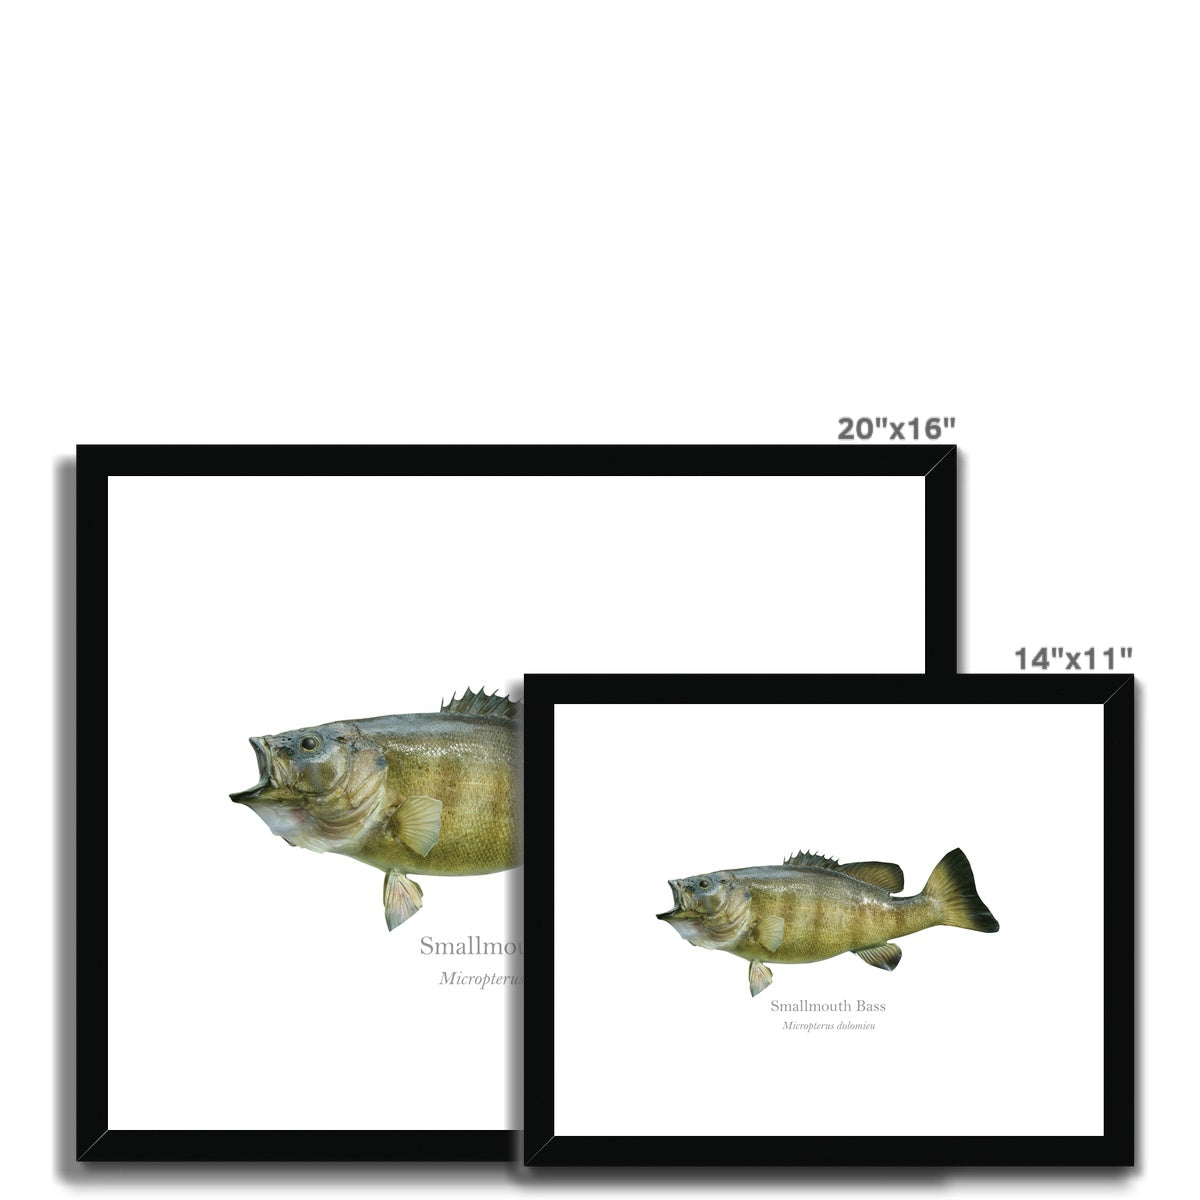 Smallmouth Bass - Framed & Mounted Print - With Scientific Name